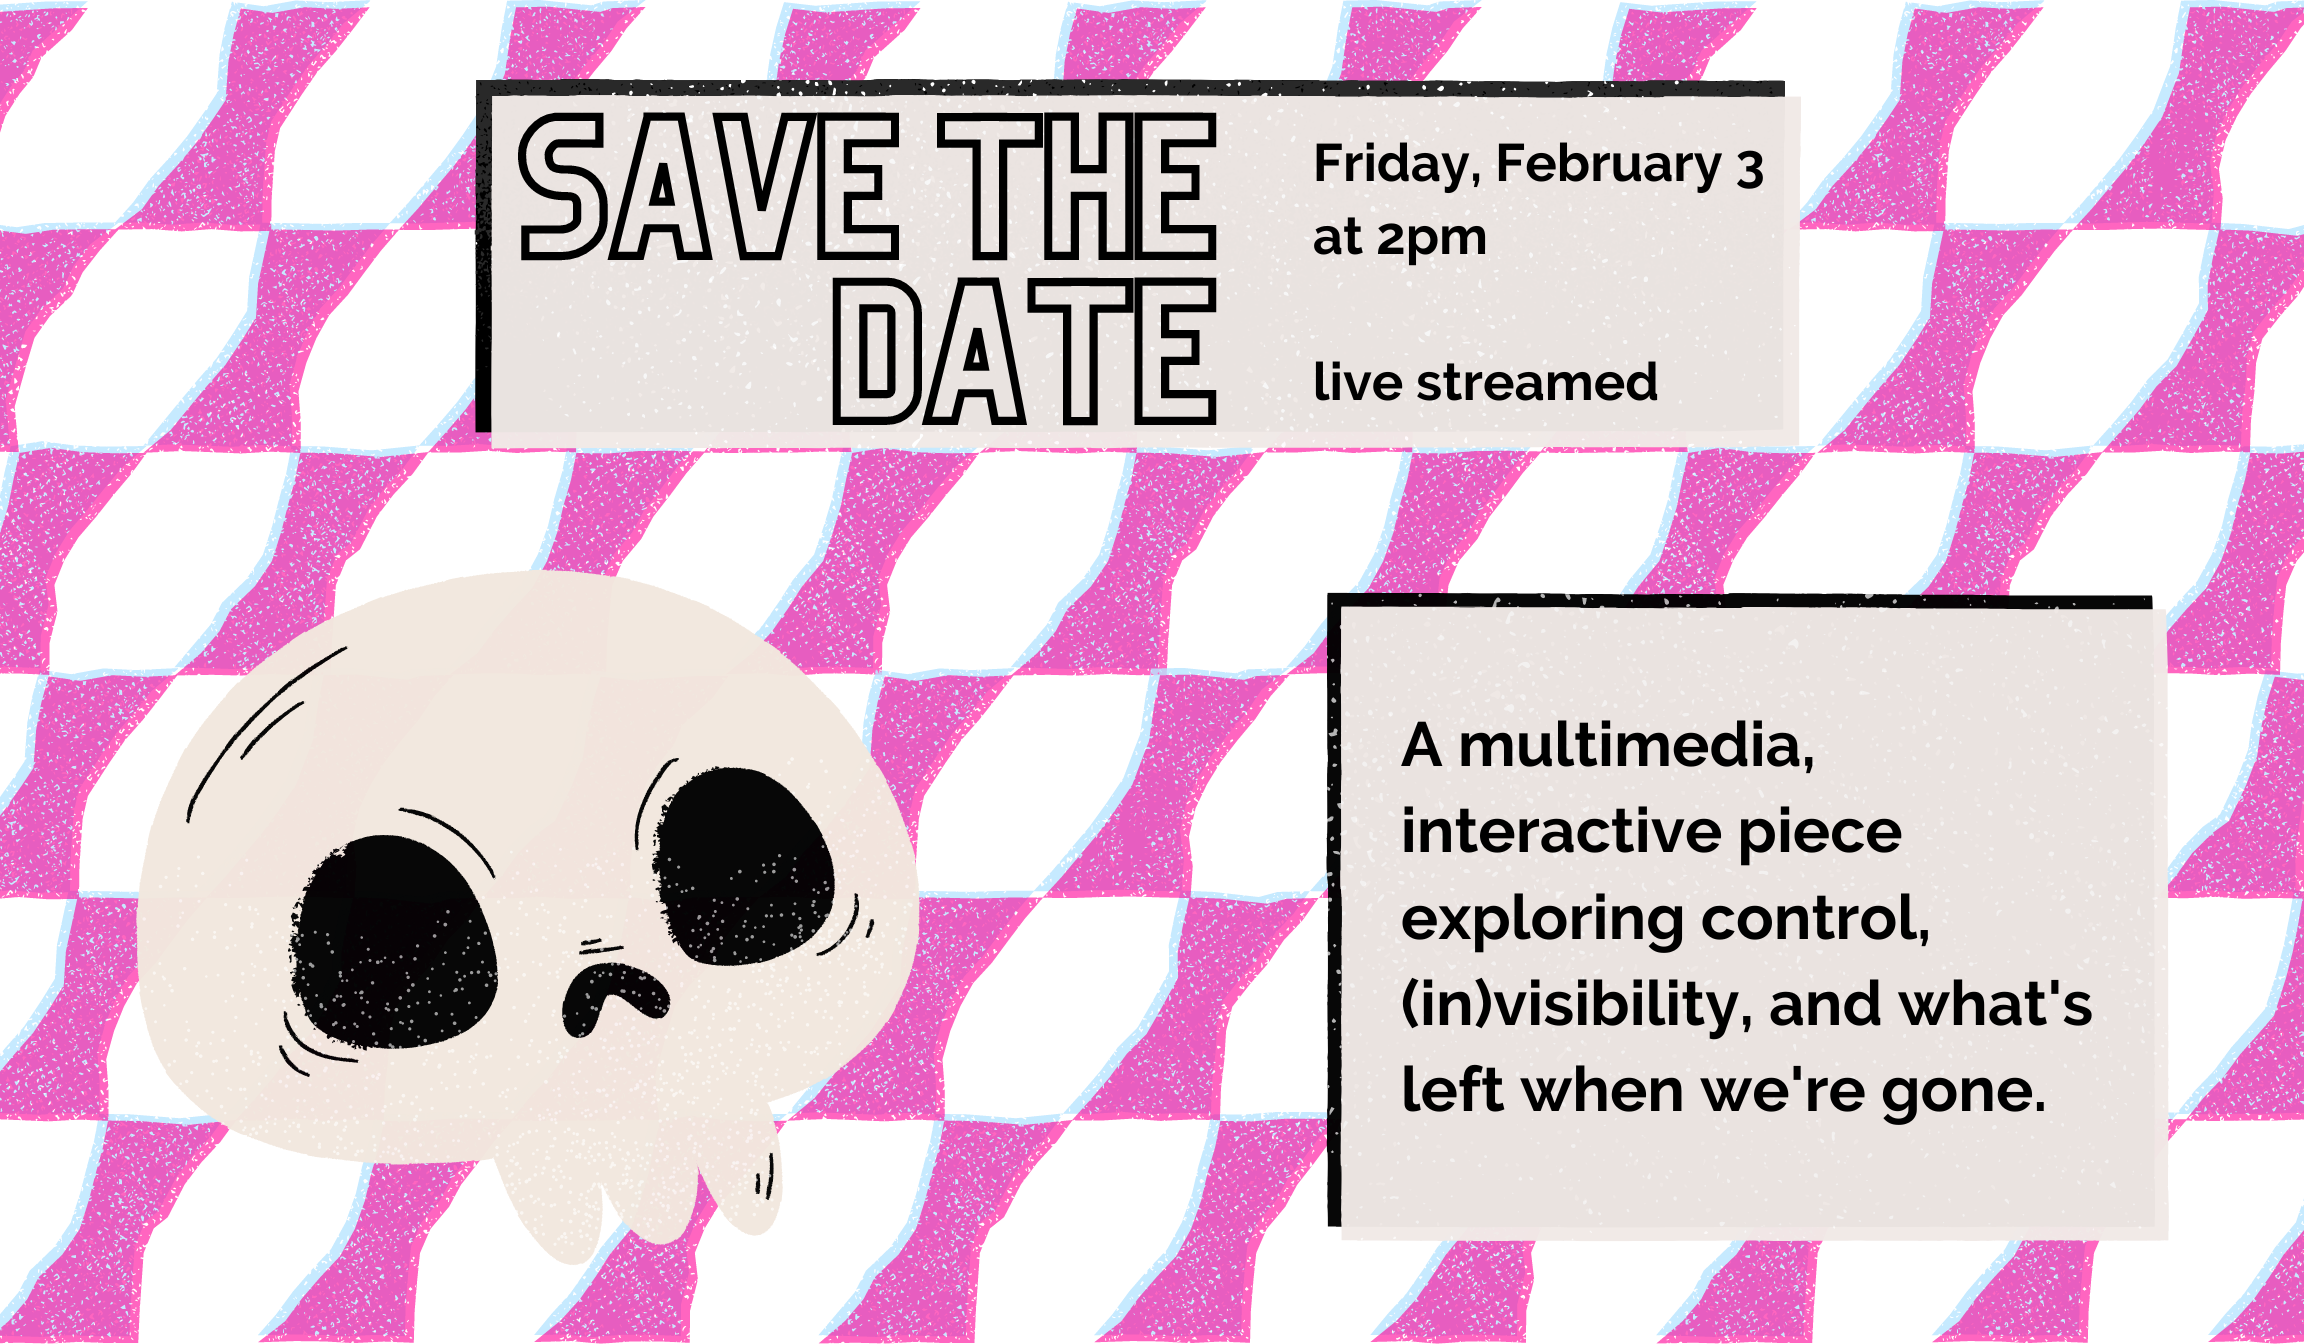 A risograph style poster image with a pink and blue background pattern, a cute illustrative skull, and boxes holding the following text: SAVE THE DATE Friday, February 3 at 2pm live streamed / A multimedia, interactive piece exploring control, (in)visibility, and what’s left when we’re gone.